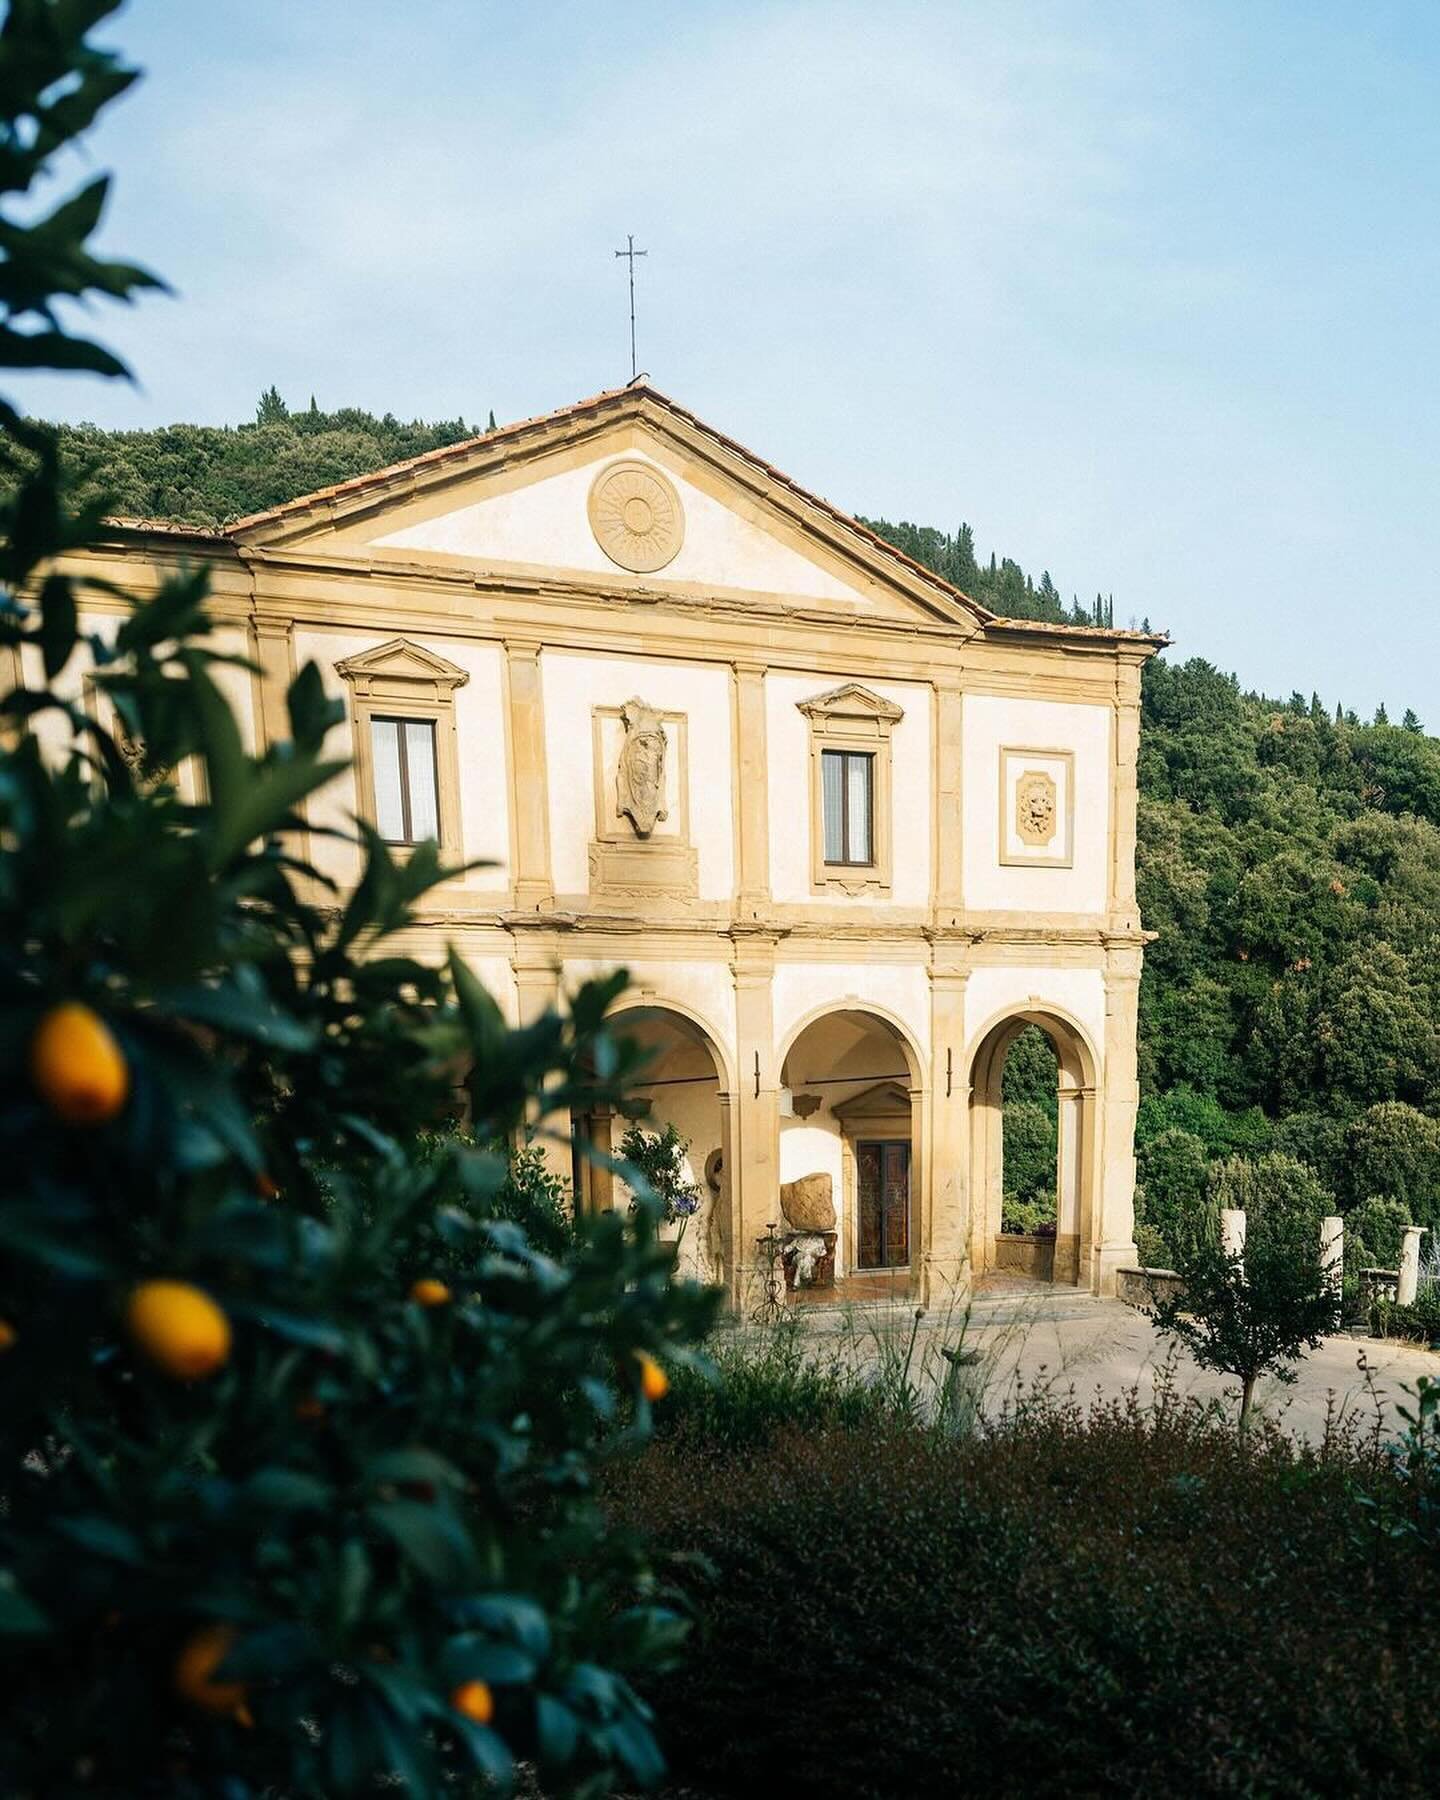 Sitting high above the hills of Fiesole is @laloggia.villasanmichele, the fine dining restaurant located at @belmondvillasanmichele led by @alessandro.cozzolino. 

Here you can explore how every dish he makes for the menu has a personal connection to